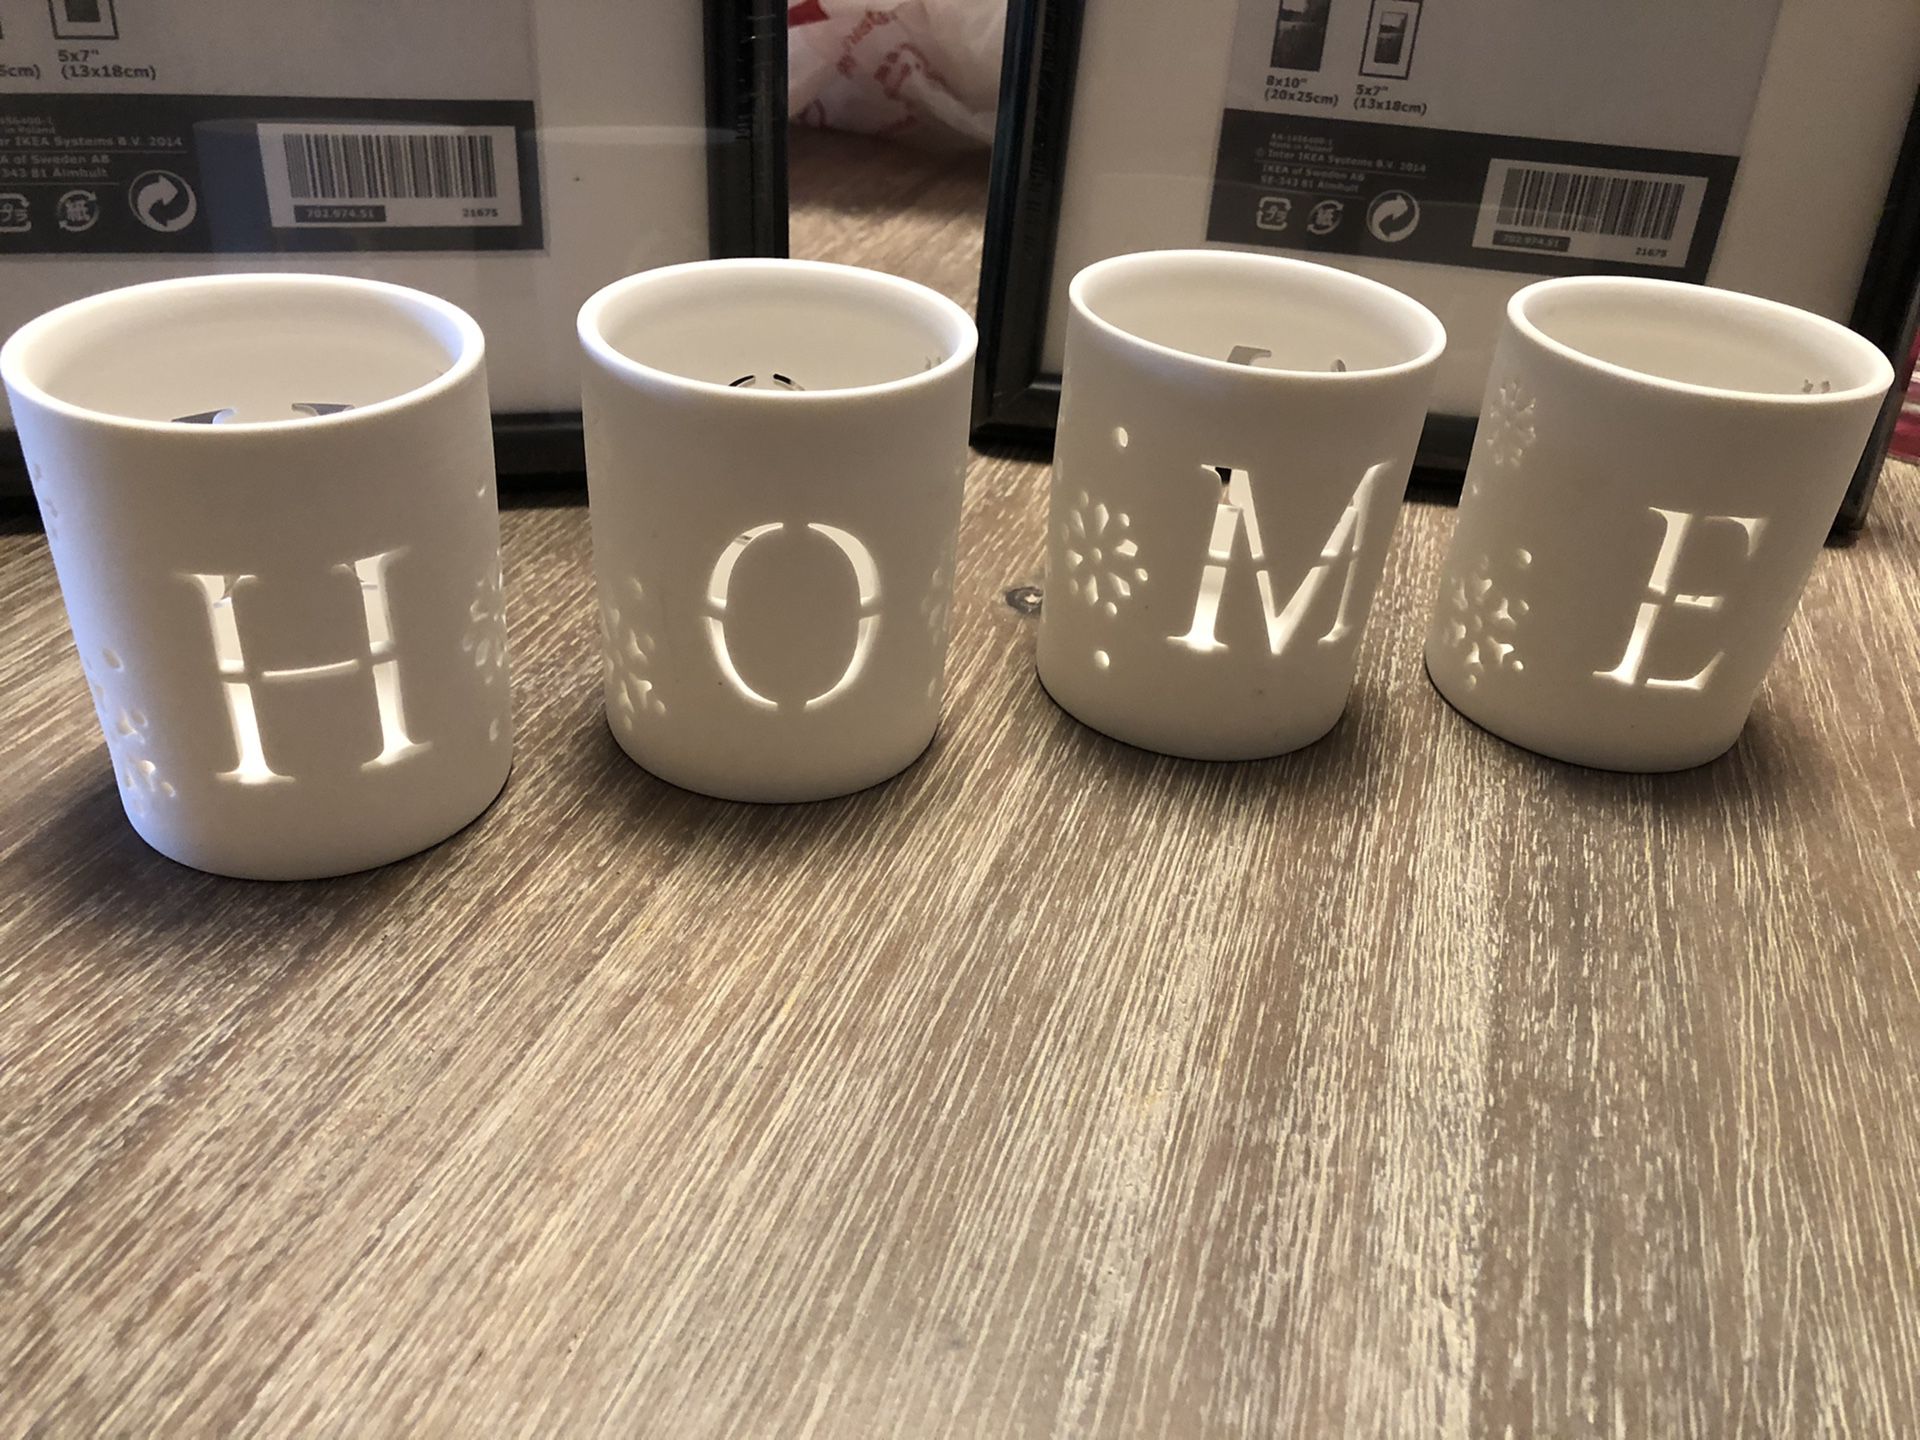 Small candle holders